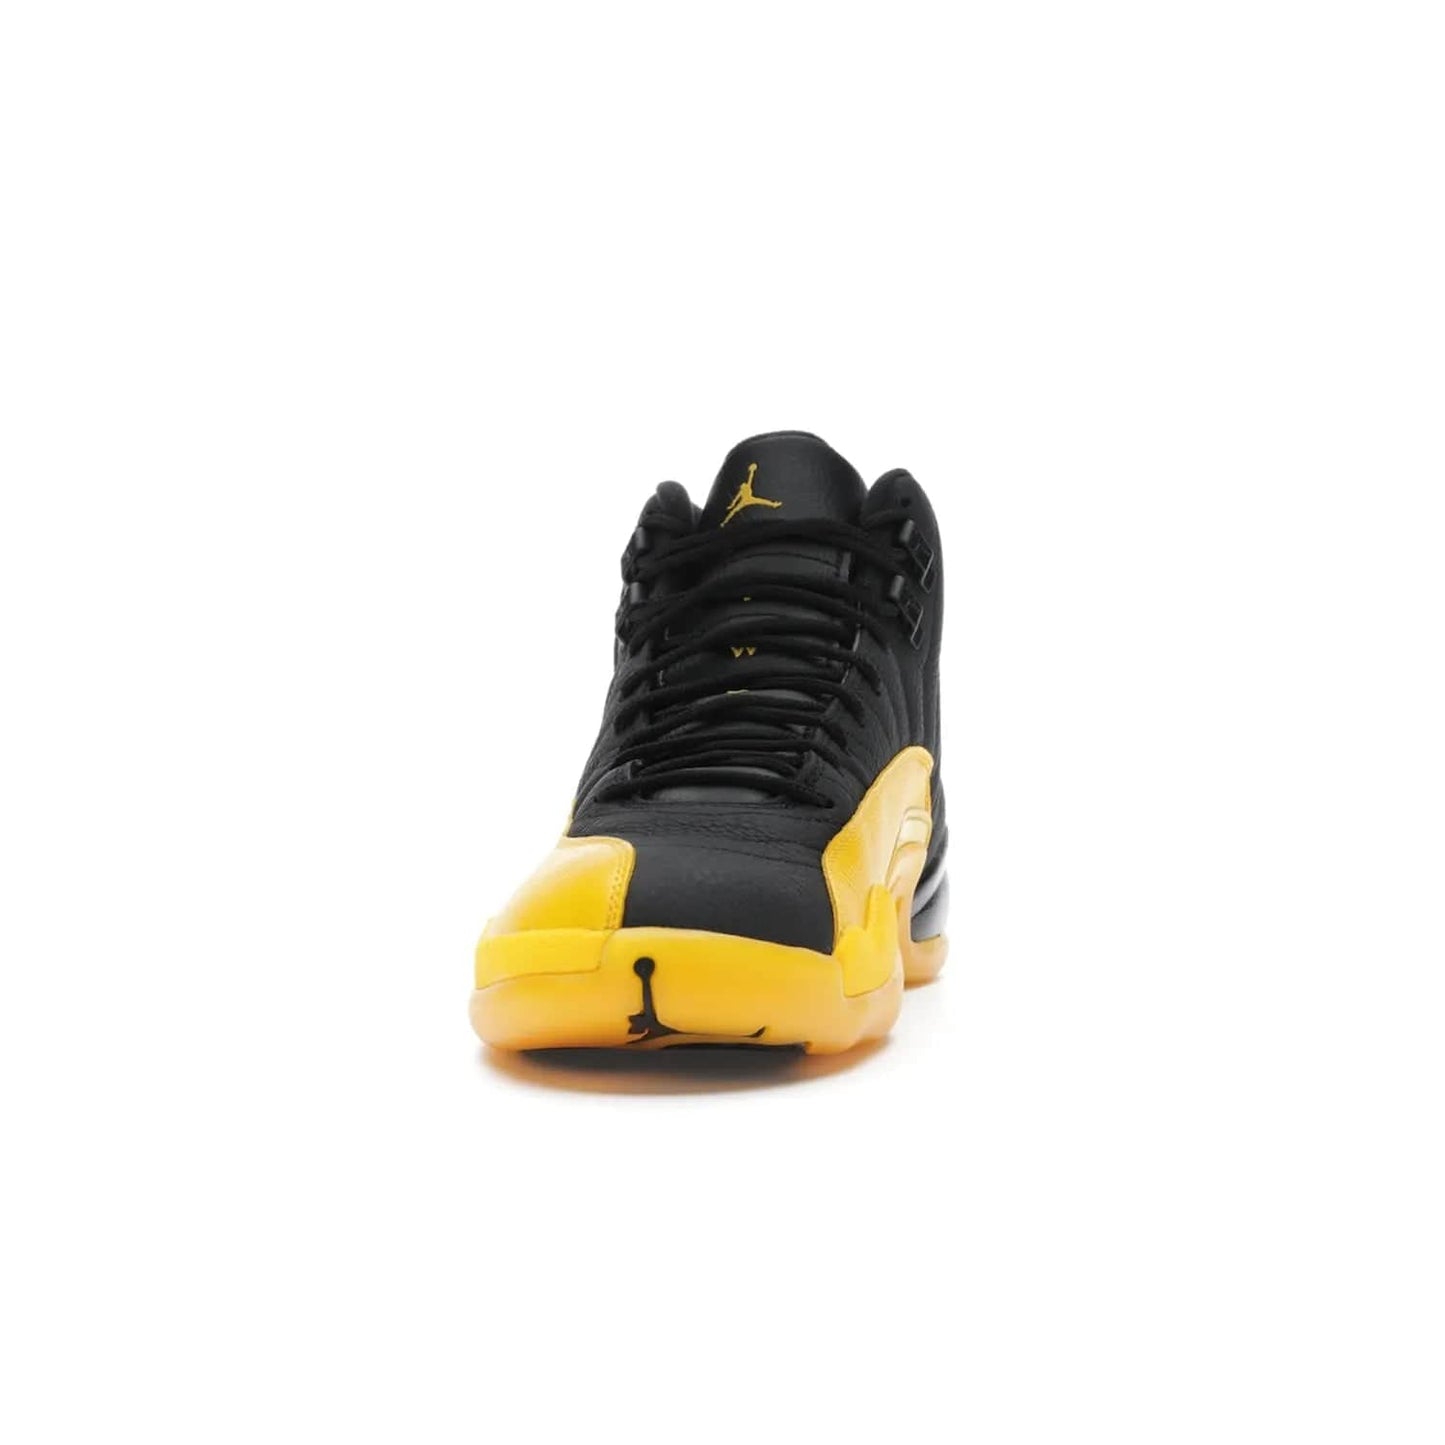 Jordan 12 Retro Black University Gold - Image 11 - Only at www.BallersClubKickz.com - This Jordan 12 Retro features a black tumbled leather upper and University Gold accents for a modern twist. Boasting Jordan "Two Three" branding and a yellow sole, these shoes will elevate your wardrobe. Fresh, sleek, and one of a kind - the Jordan 12 University Gold is your summer sneaker.